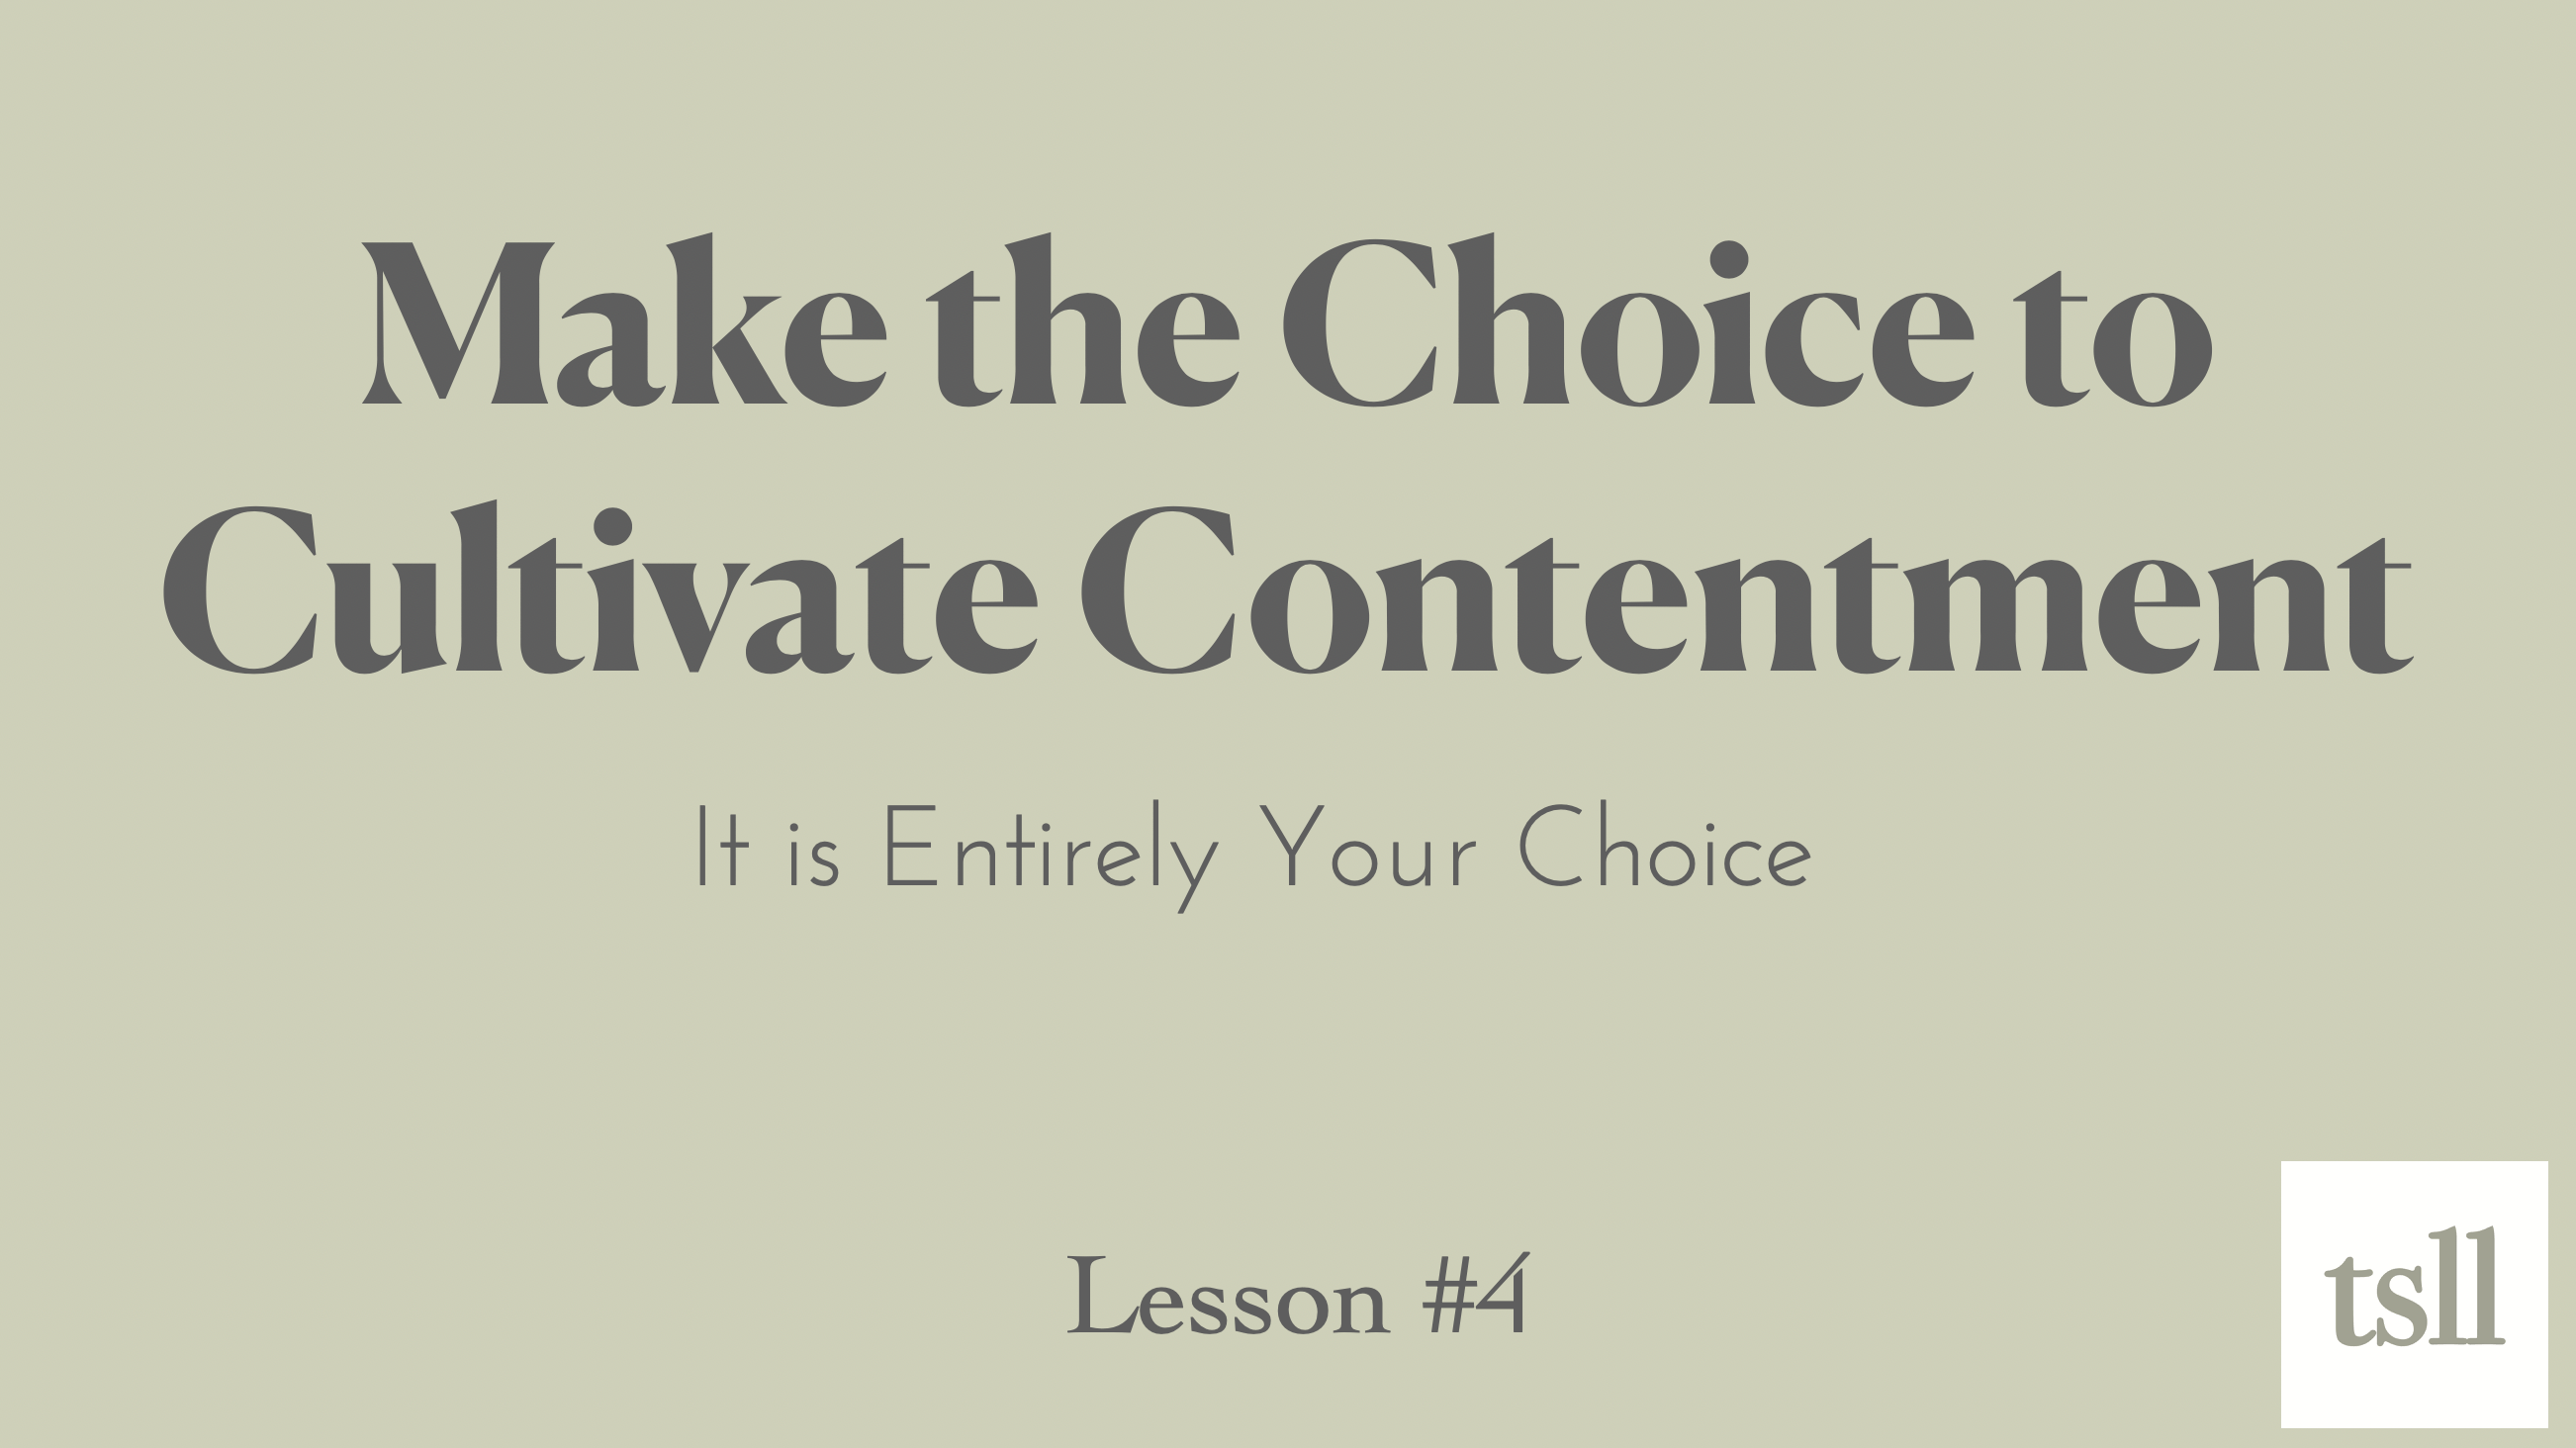 Part 1: Making the Choice to Cultivate Contentment (23:11)